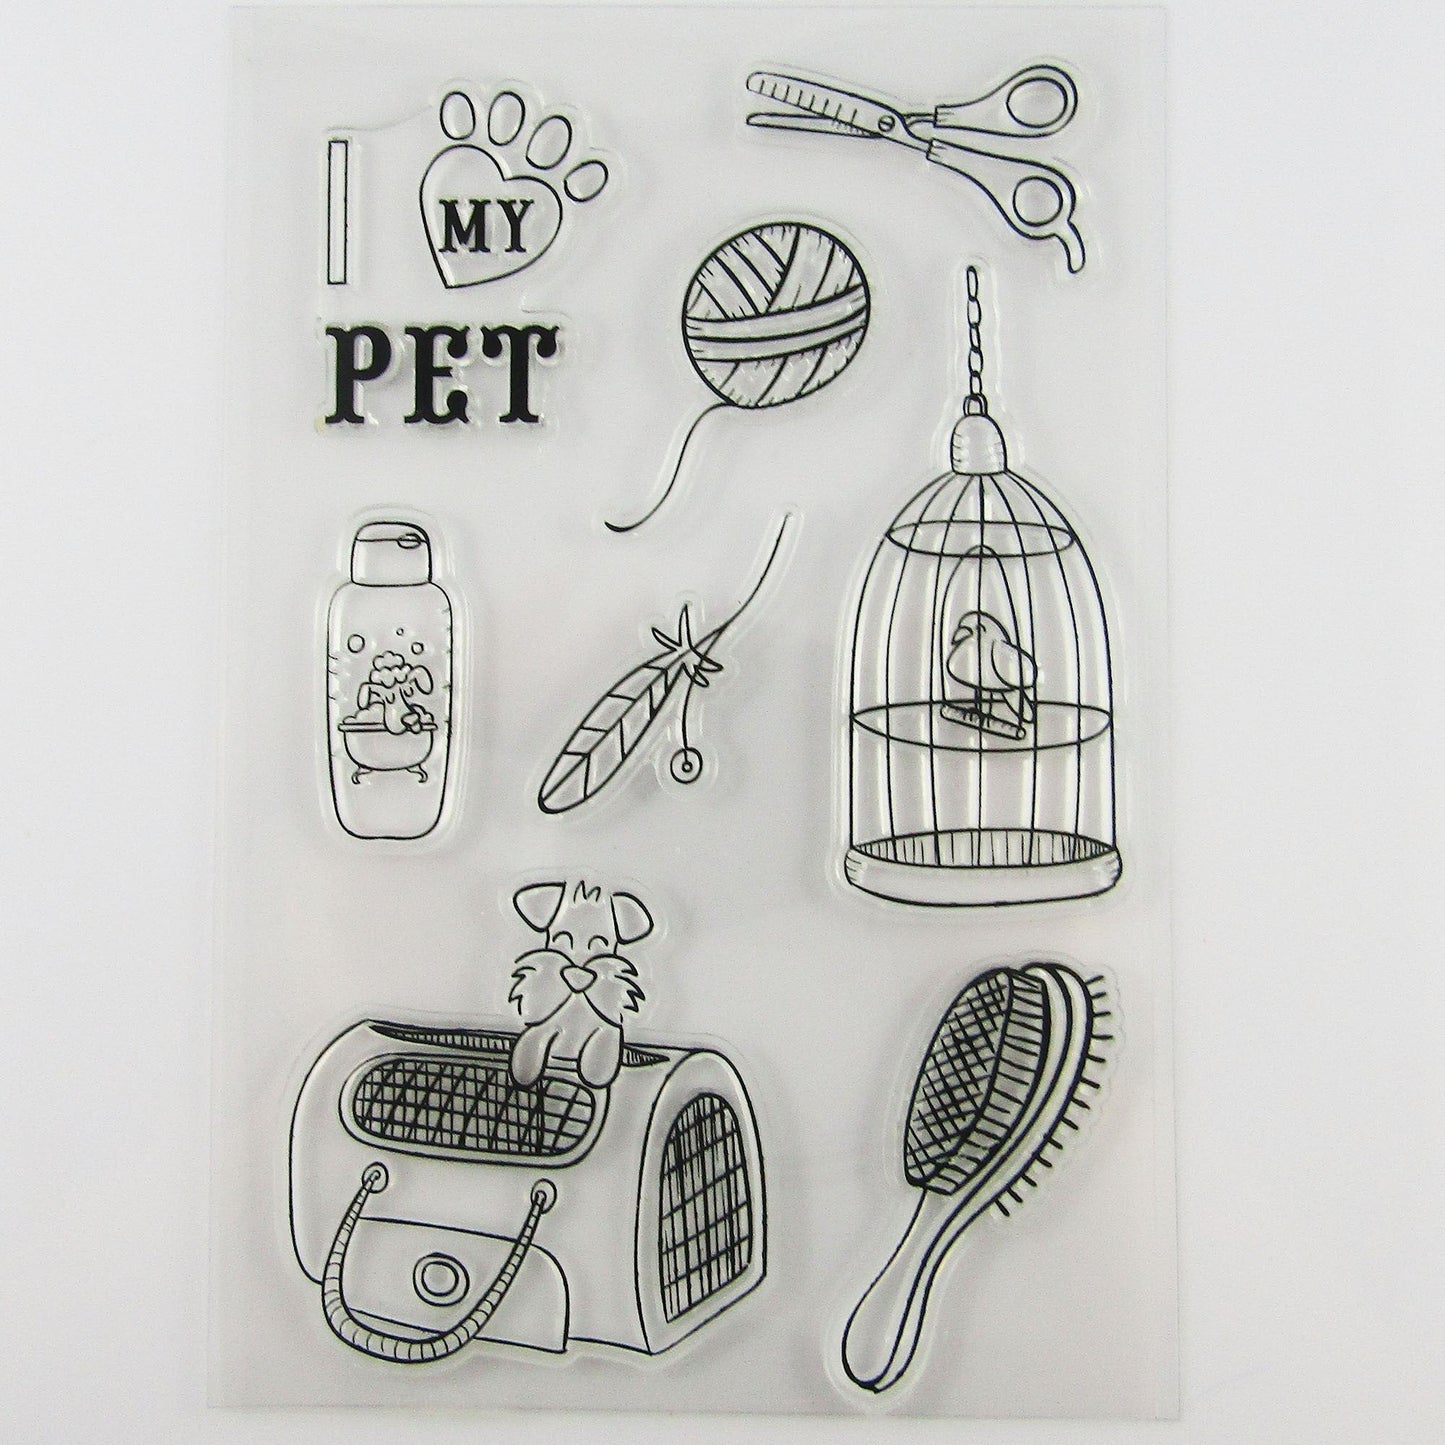 I Love My Pet Clear Stamp Silicone Rubber Scrapbooking Card Making